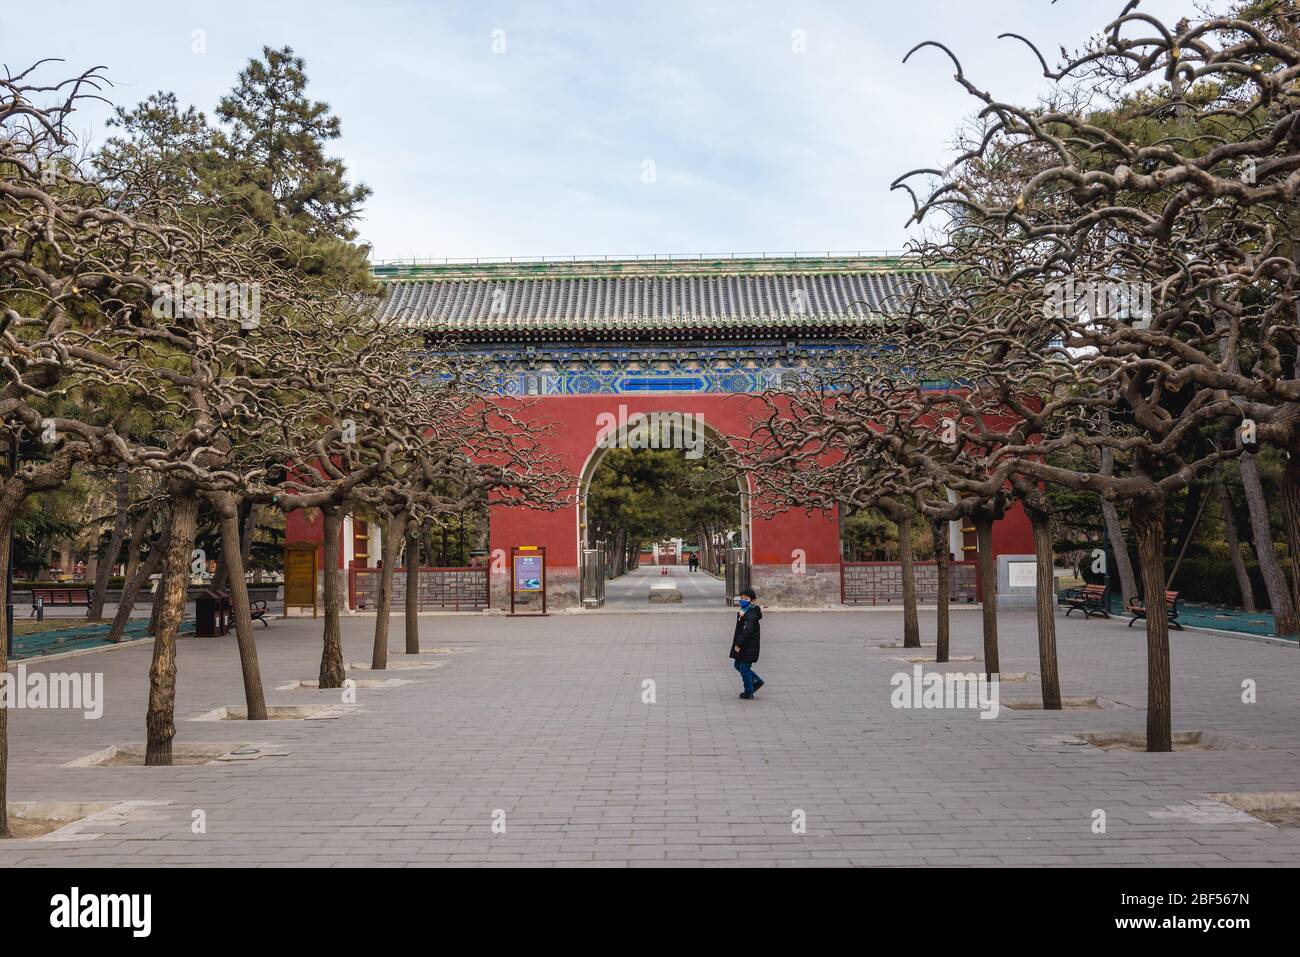 Gateway in Ritan Park - Temple of the Sun Park in Jianguomen area of Chaoyang District, Beijing, China Stock Photo